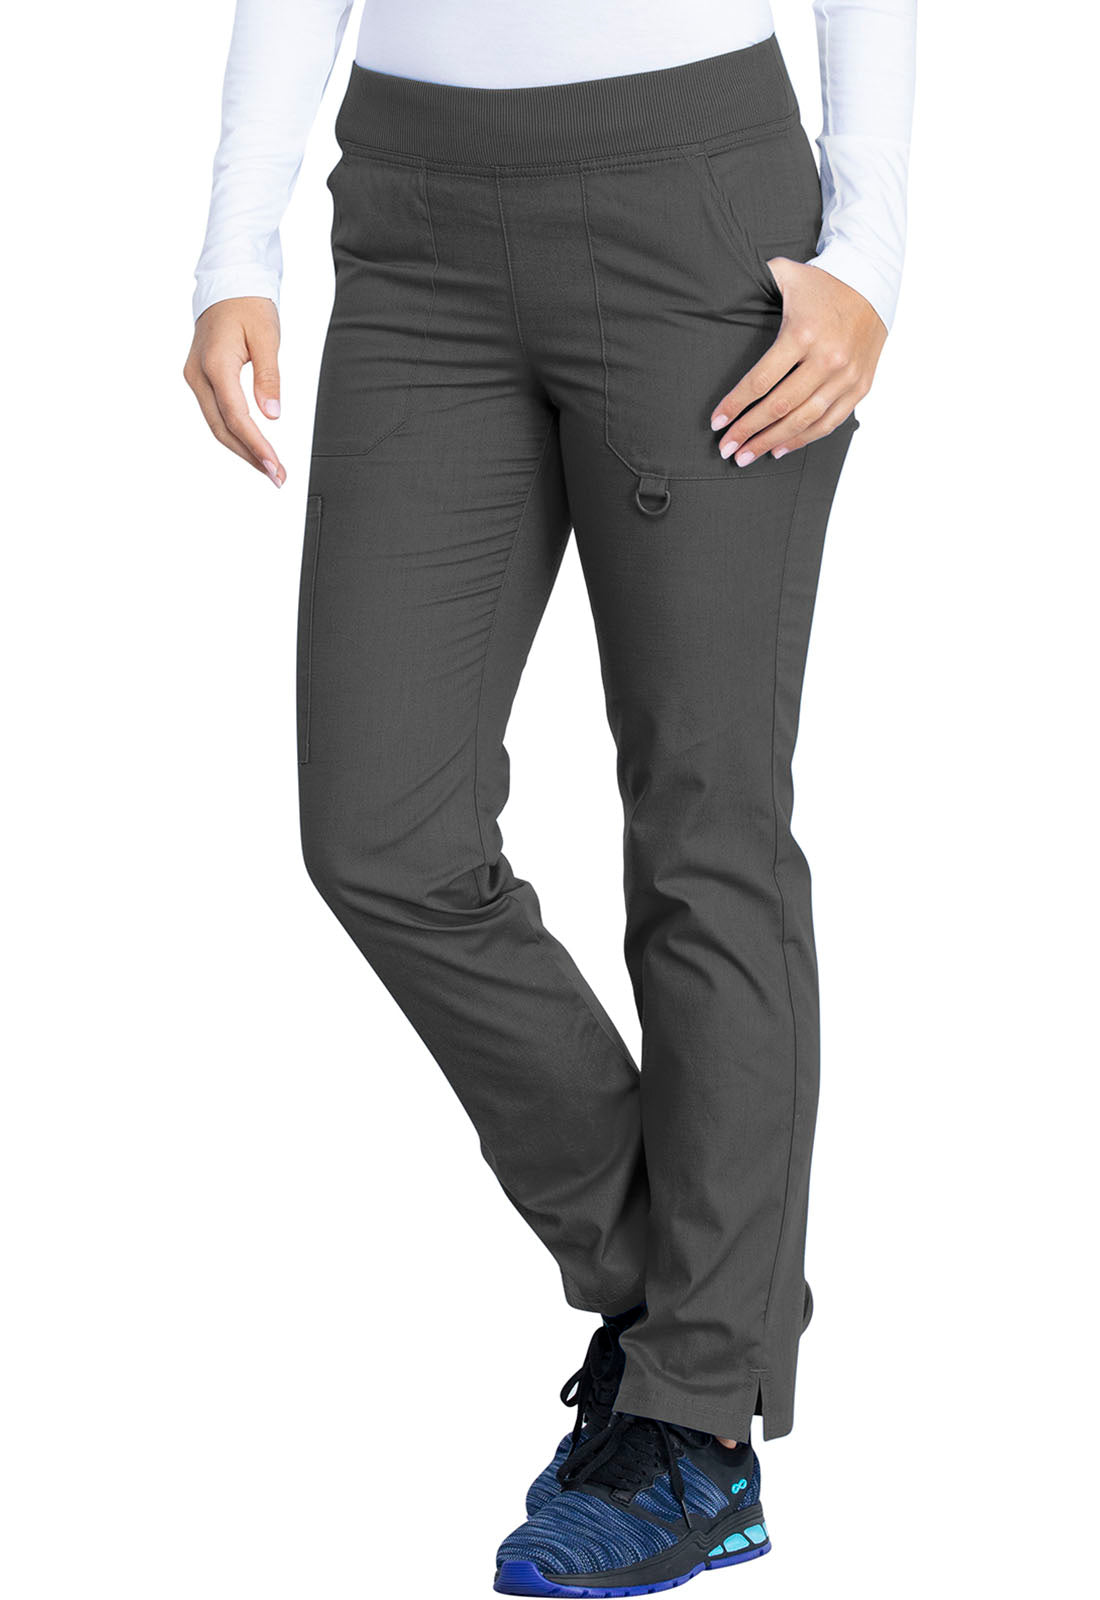 Exist. Conjunto Mujer Dickies EDS Signature Mod.85820/DK125PTWZ